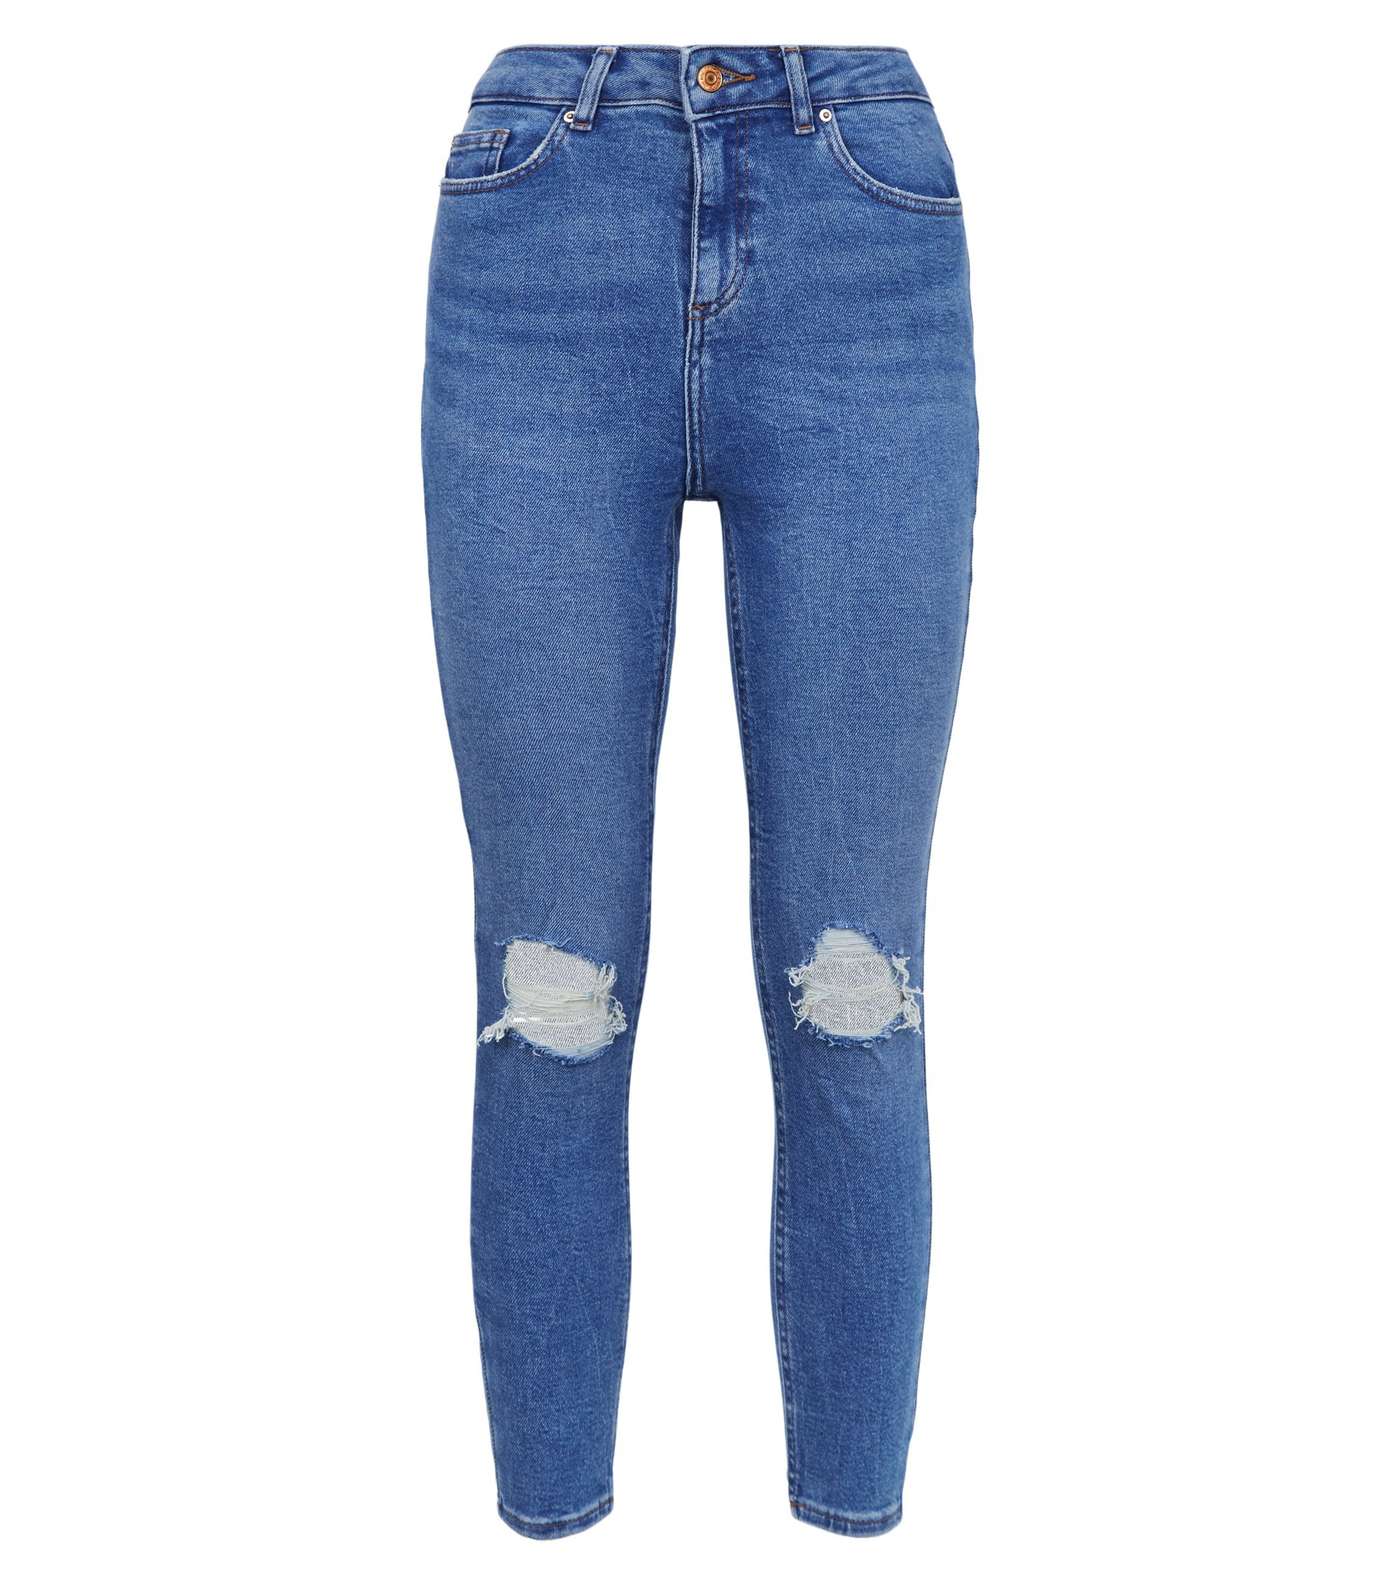 Petite Bright Blue Ripped High Waist Jeans Image 4